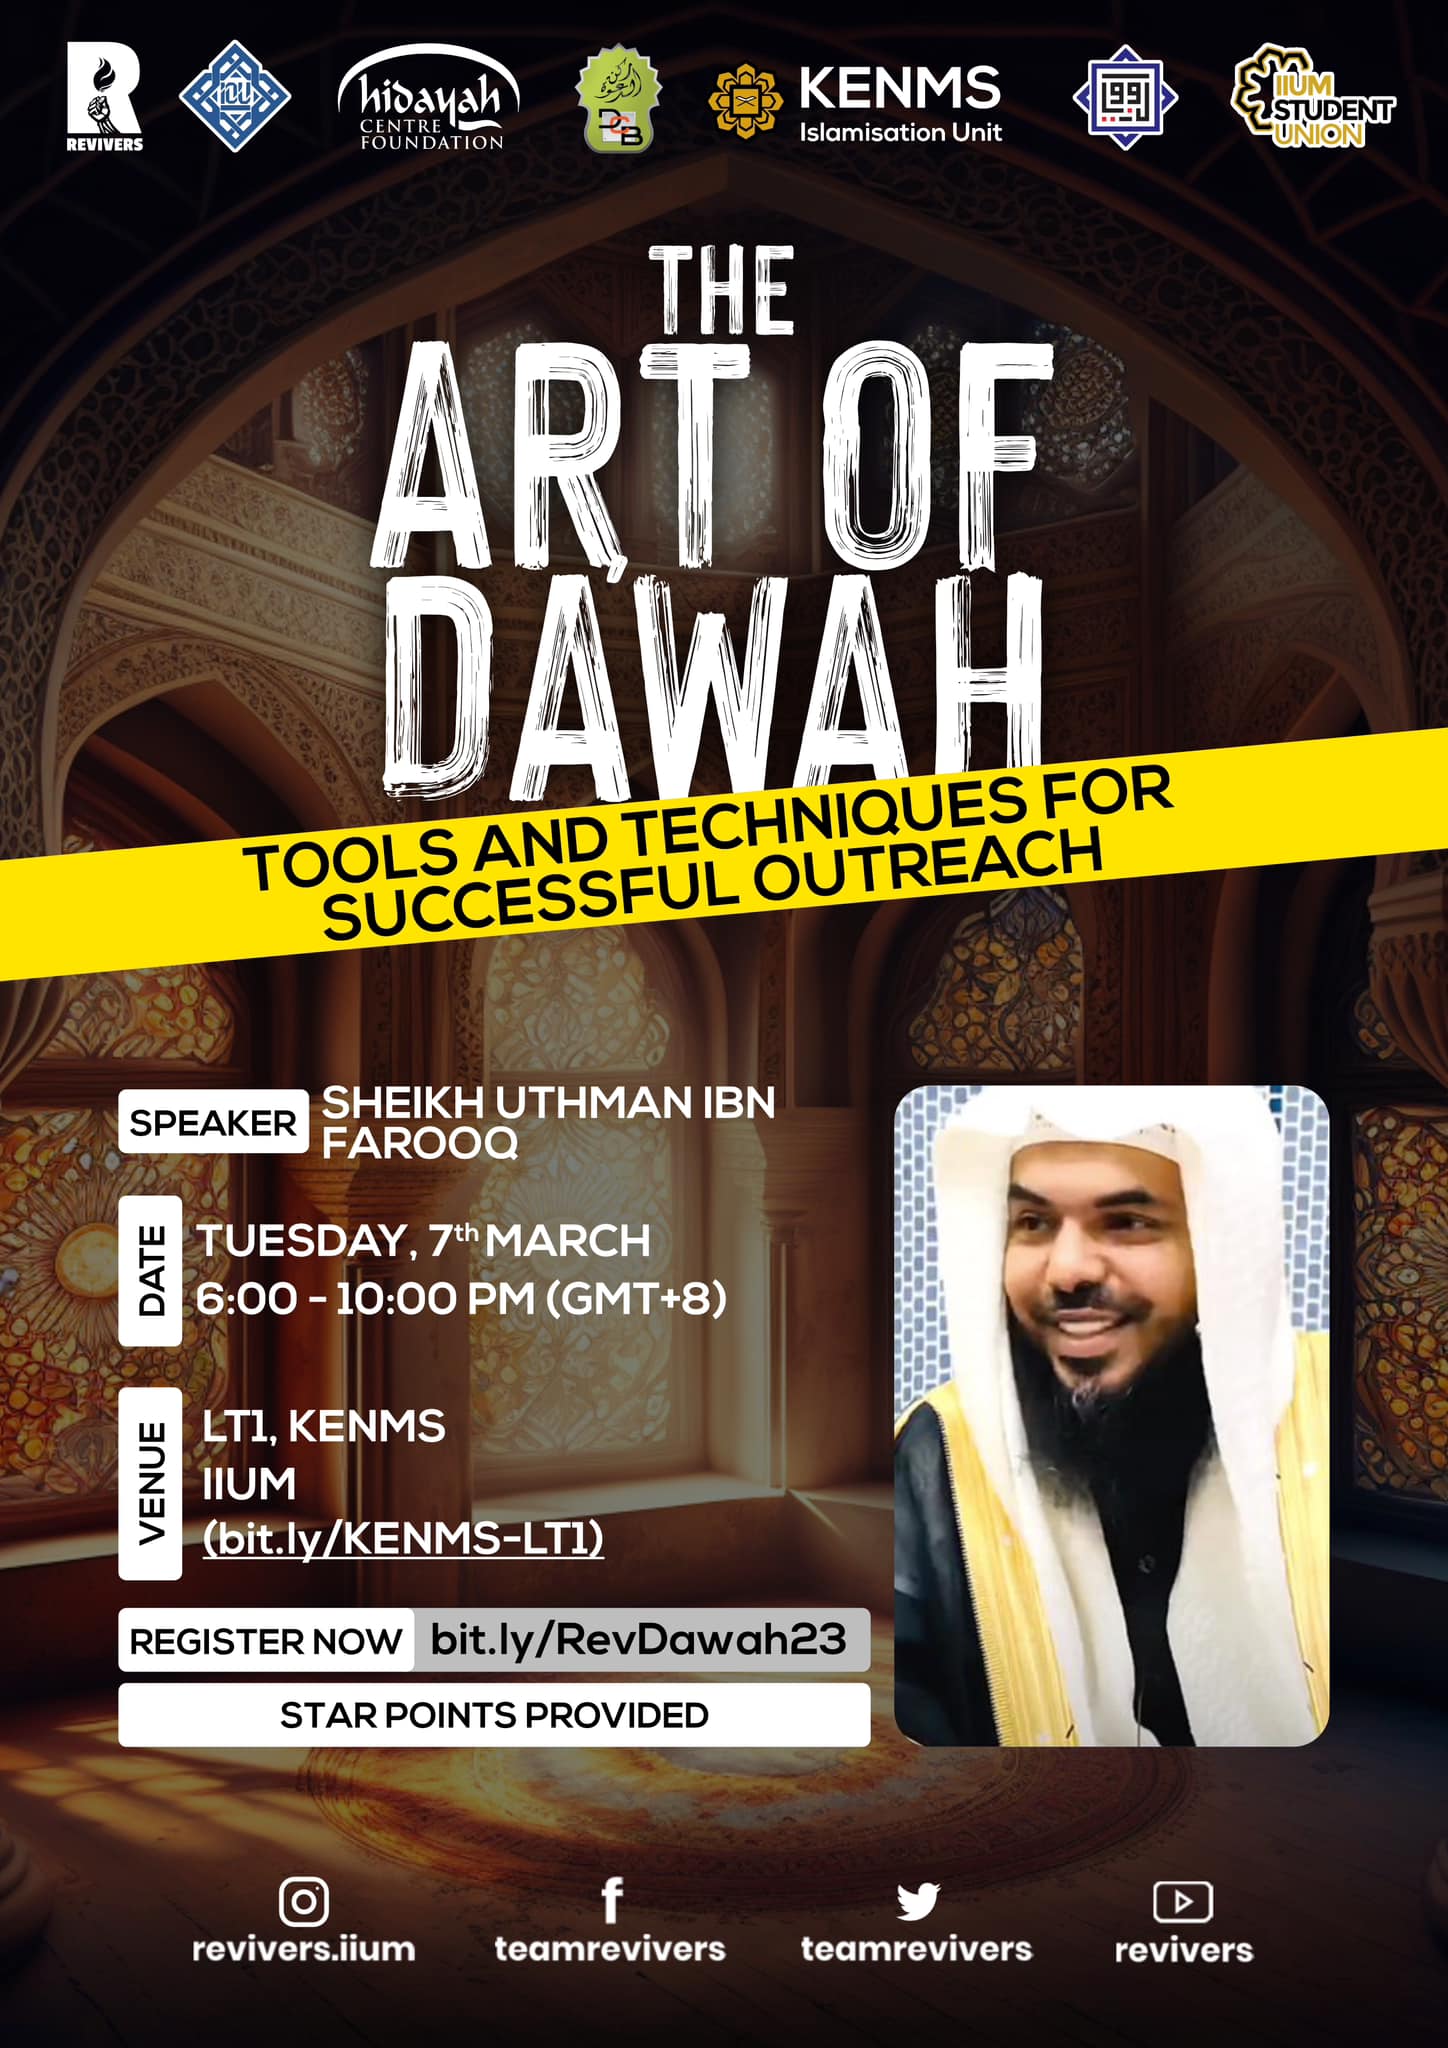 The Art of Dawah: Tools and Techniques for Successful Outreach